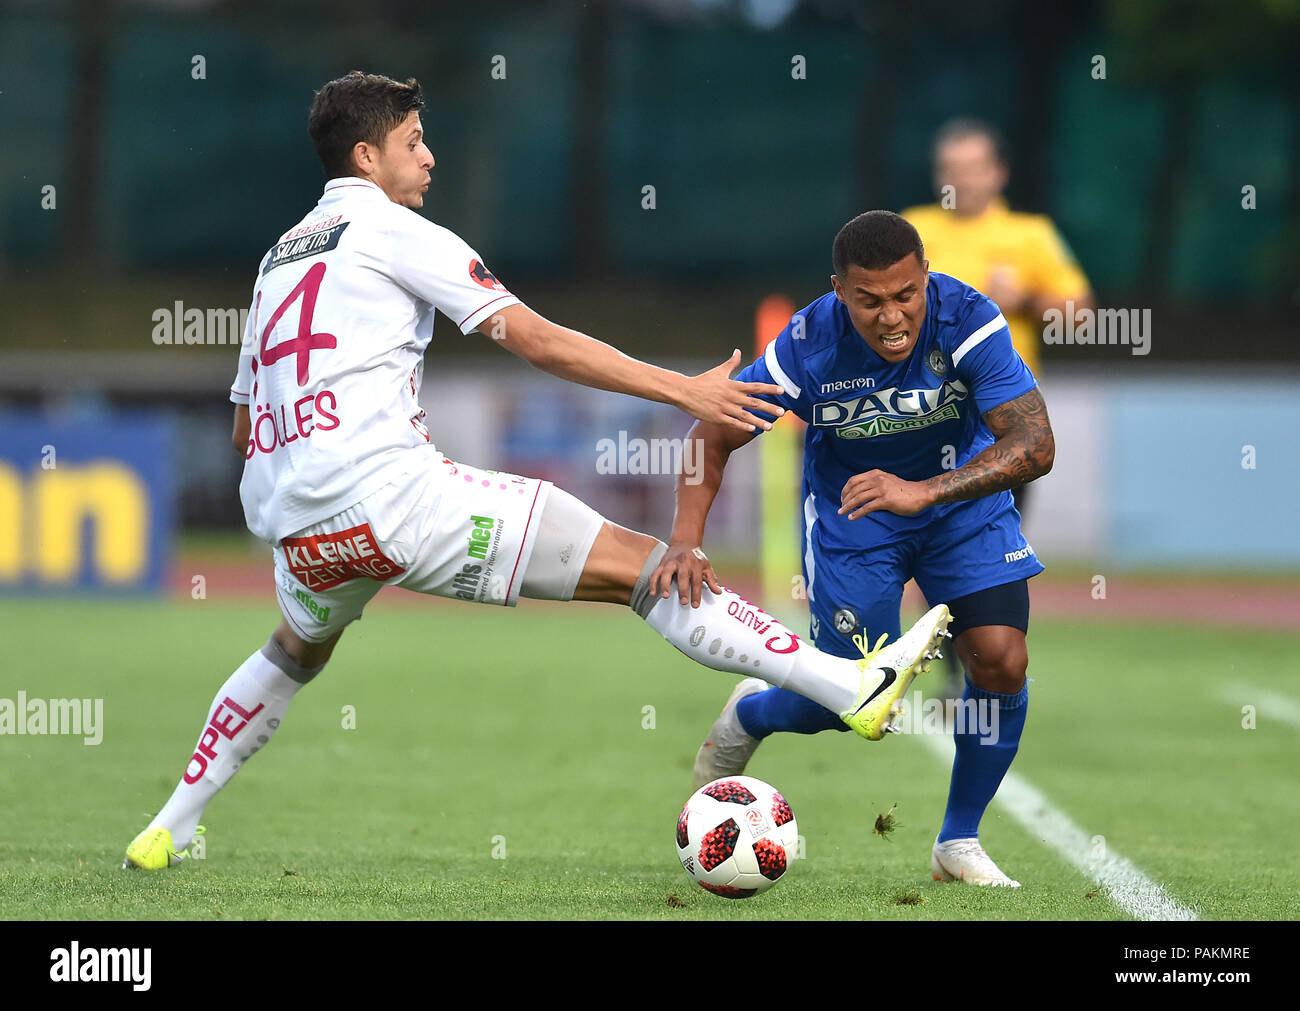 Wolfsberger, Austria, 24 July 2018. WAC's Golles vies with Udinese's Machis during the pre season friendly football match between RZ Pellets WAC and Udinese Calcio at Lavanttal Arena. photo Simone Ferraro / Alamy Live News Stock Photo